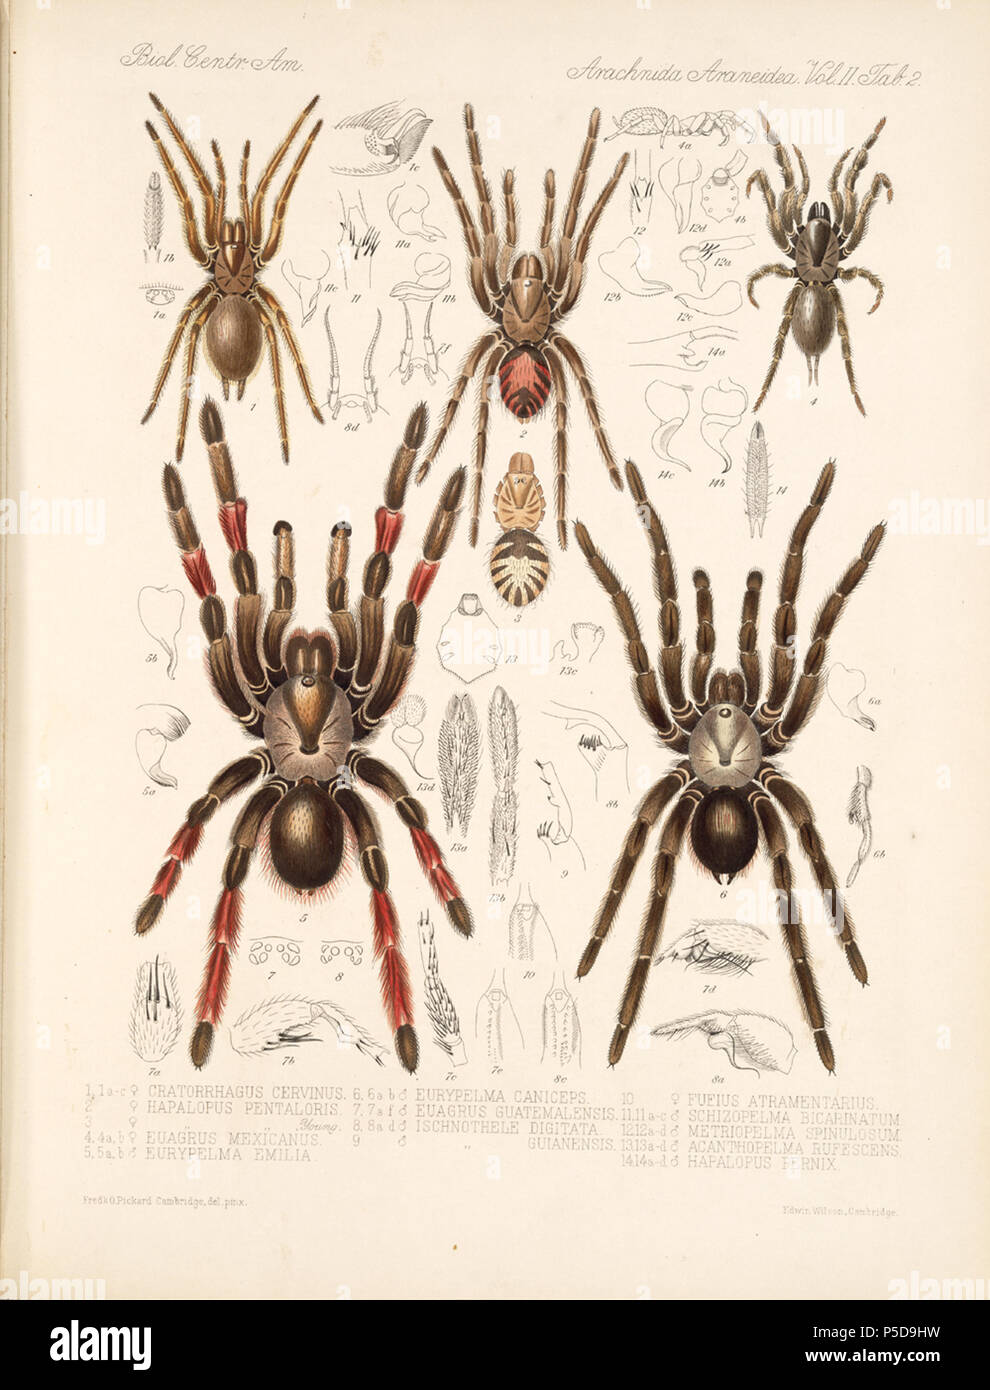 N/A. English: Zoological illustrations of spiders made by Frederick O. Picard-Cambridge for the Biologia Centrali-Americana, an encyclopedia of the natural history of Mexico and Central America . between 1897 and 1905. Frederick Octavius Pickard-Cambridge 116 Arachnida Araneidea Vol 2 Table 2 Stock Photo